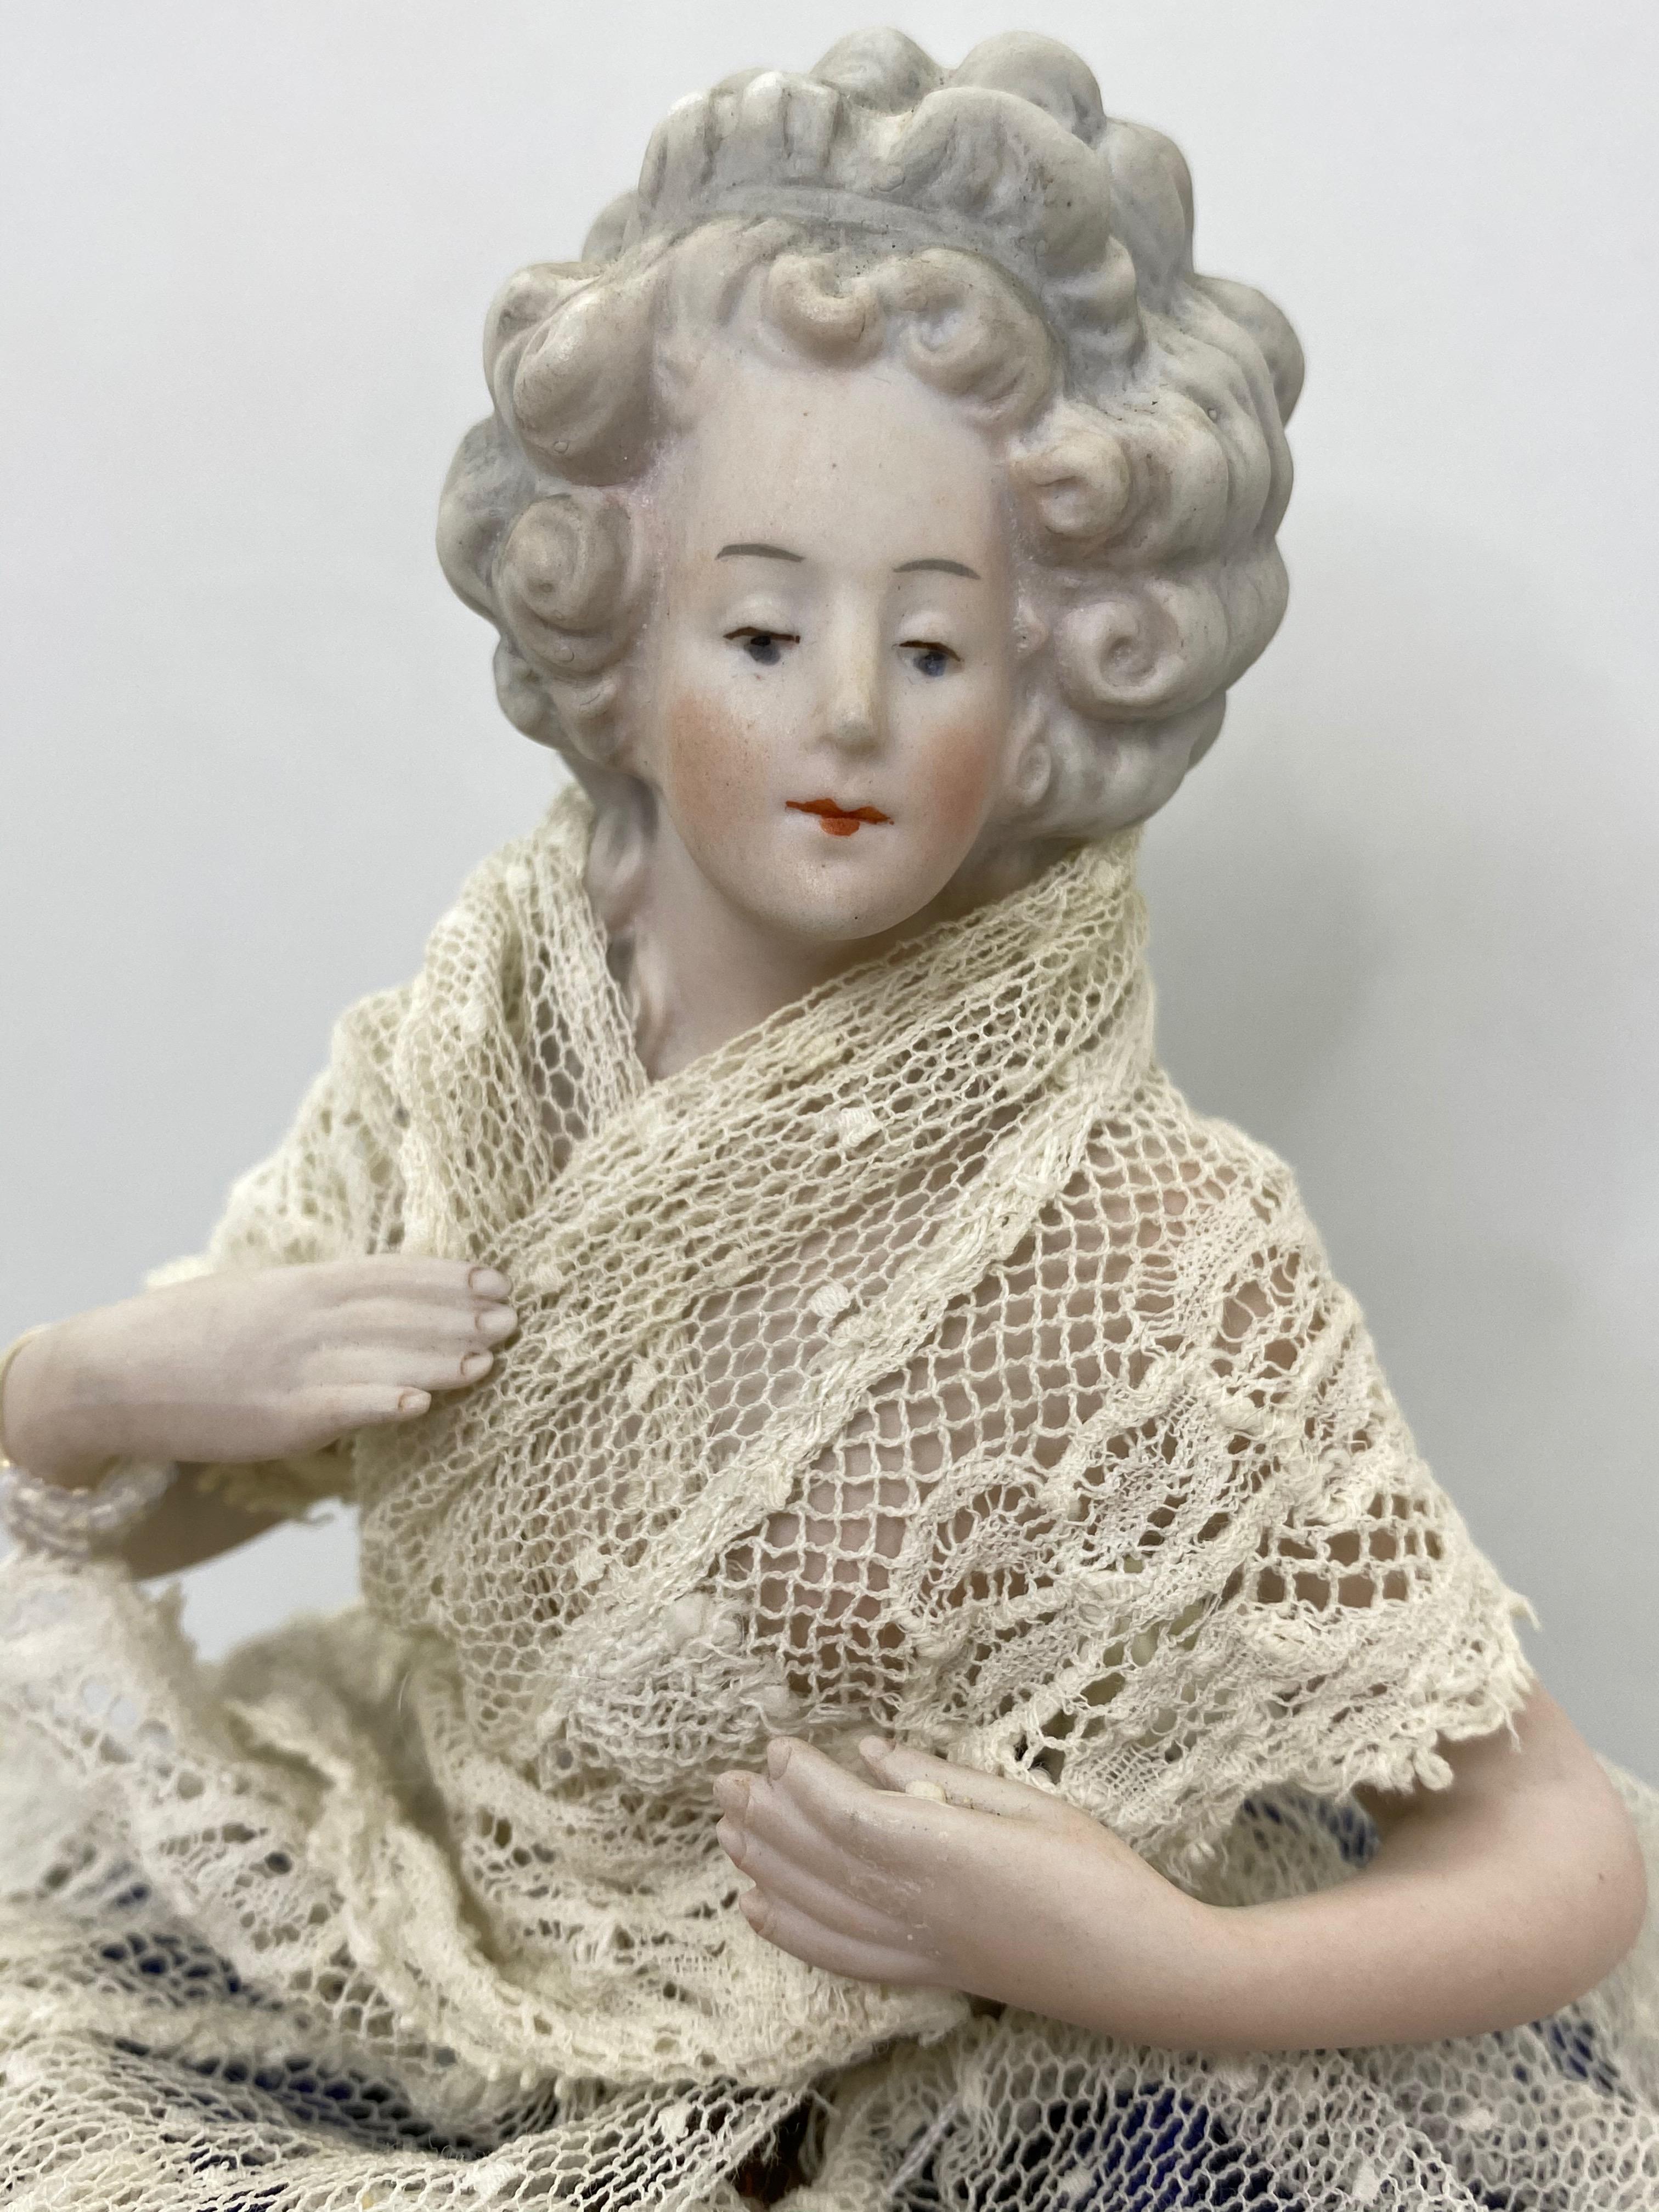 German Bisque Porcelain Half Doll with Original Wire Lace Skirt Antique, 1910s For Sale 2